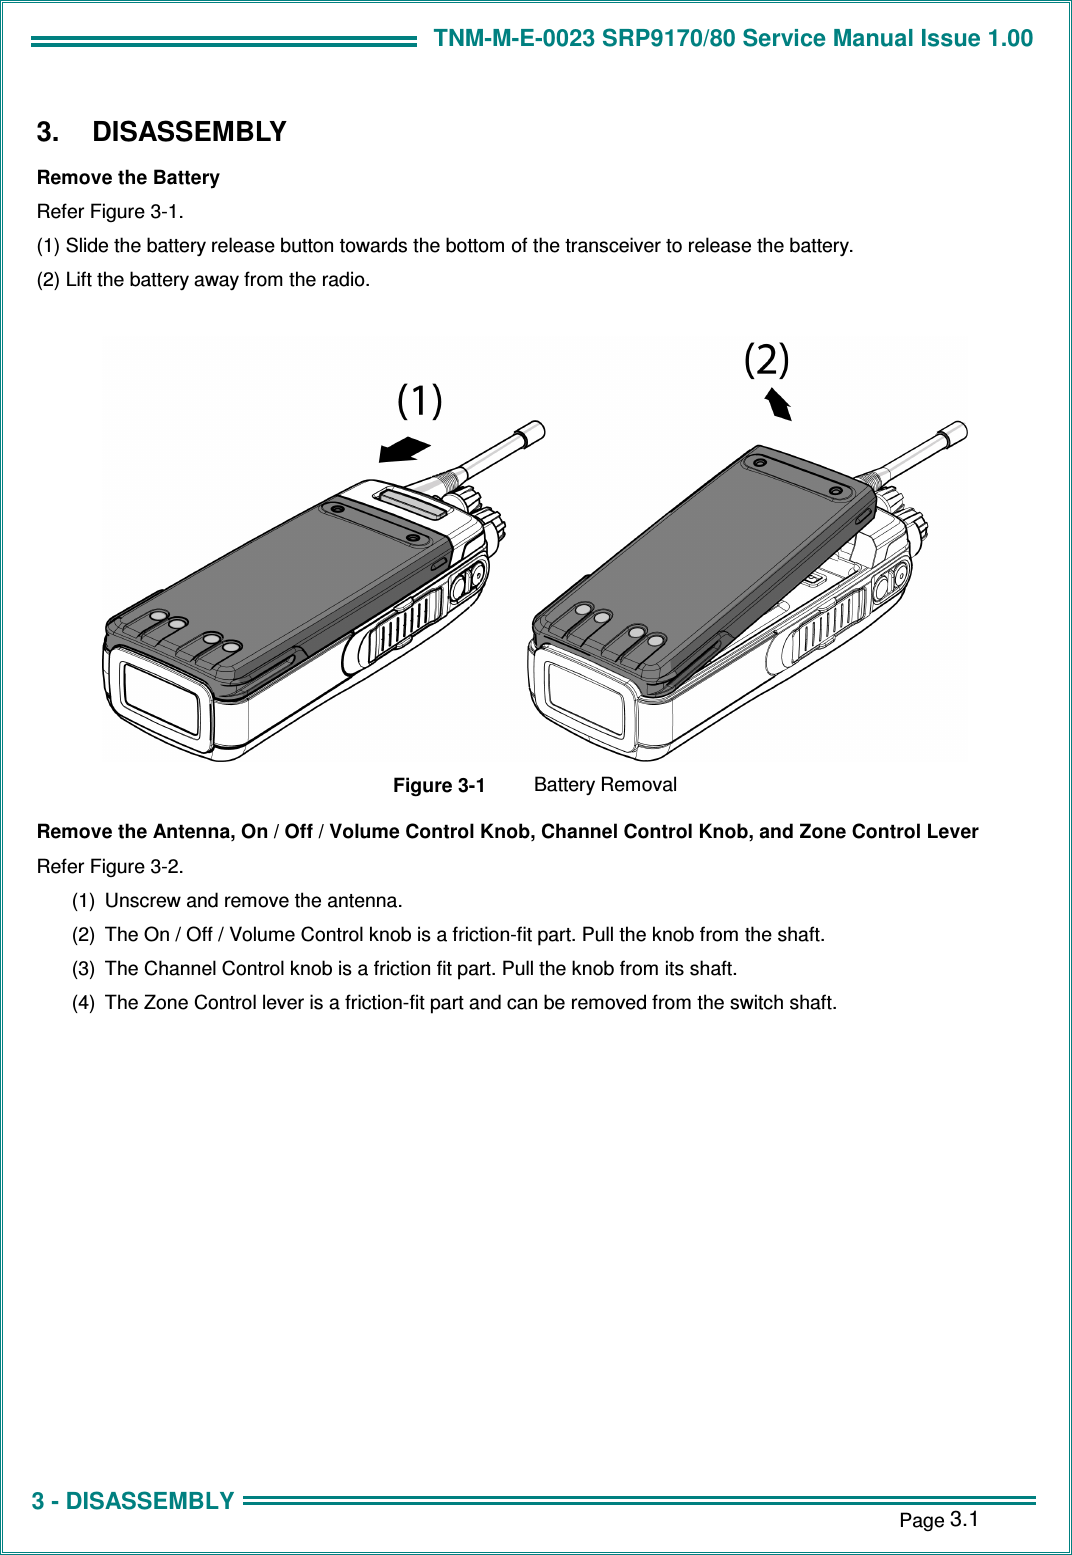 TNM-M-E-0023 SRP9170/80 Service Manual Issue 1.00 1 - INTRODUCTION    Page 3.1 3 - DISASSEMBLY 3.  DISASSEMBLY Remove the Battery Refer Figure 3-1. (1) Slide the battery release button towards the bottom of the transceiver to release the battery. (2) Lift the battery away from the radio.   Figure 3-1  Battery Removal Remove the Antenna, On / Off / Volume Control Knob, Channel Control Knob, and Zone Control Lever Refer Figure 3-2. (1)  Unscrew and remove the antenna. (2)  The On / Off / Volume Control knob is a friction-fit part. Pull the knob from the shaft. (3)  The Channel Control knob is a friction fit part. Pull the knob from its shaft. (4)  The Zone Control lever is a friction-fit part and can be removed from the switch shaft.  